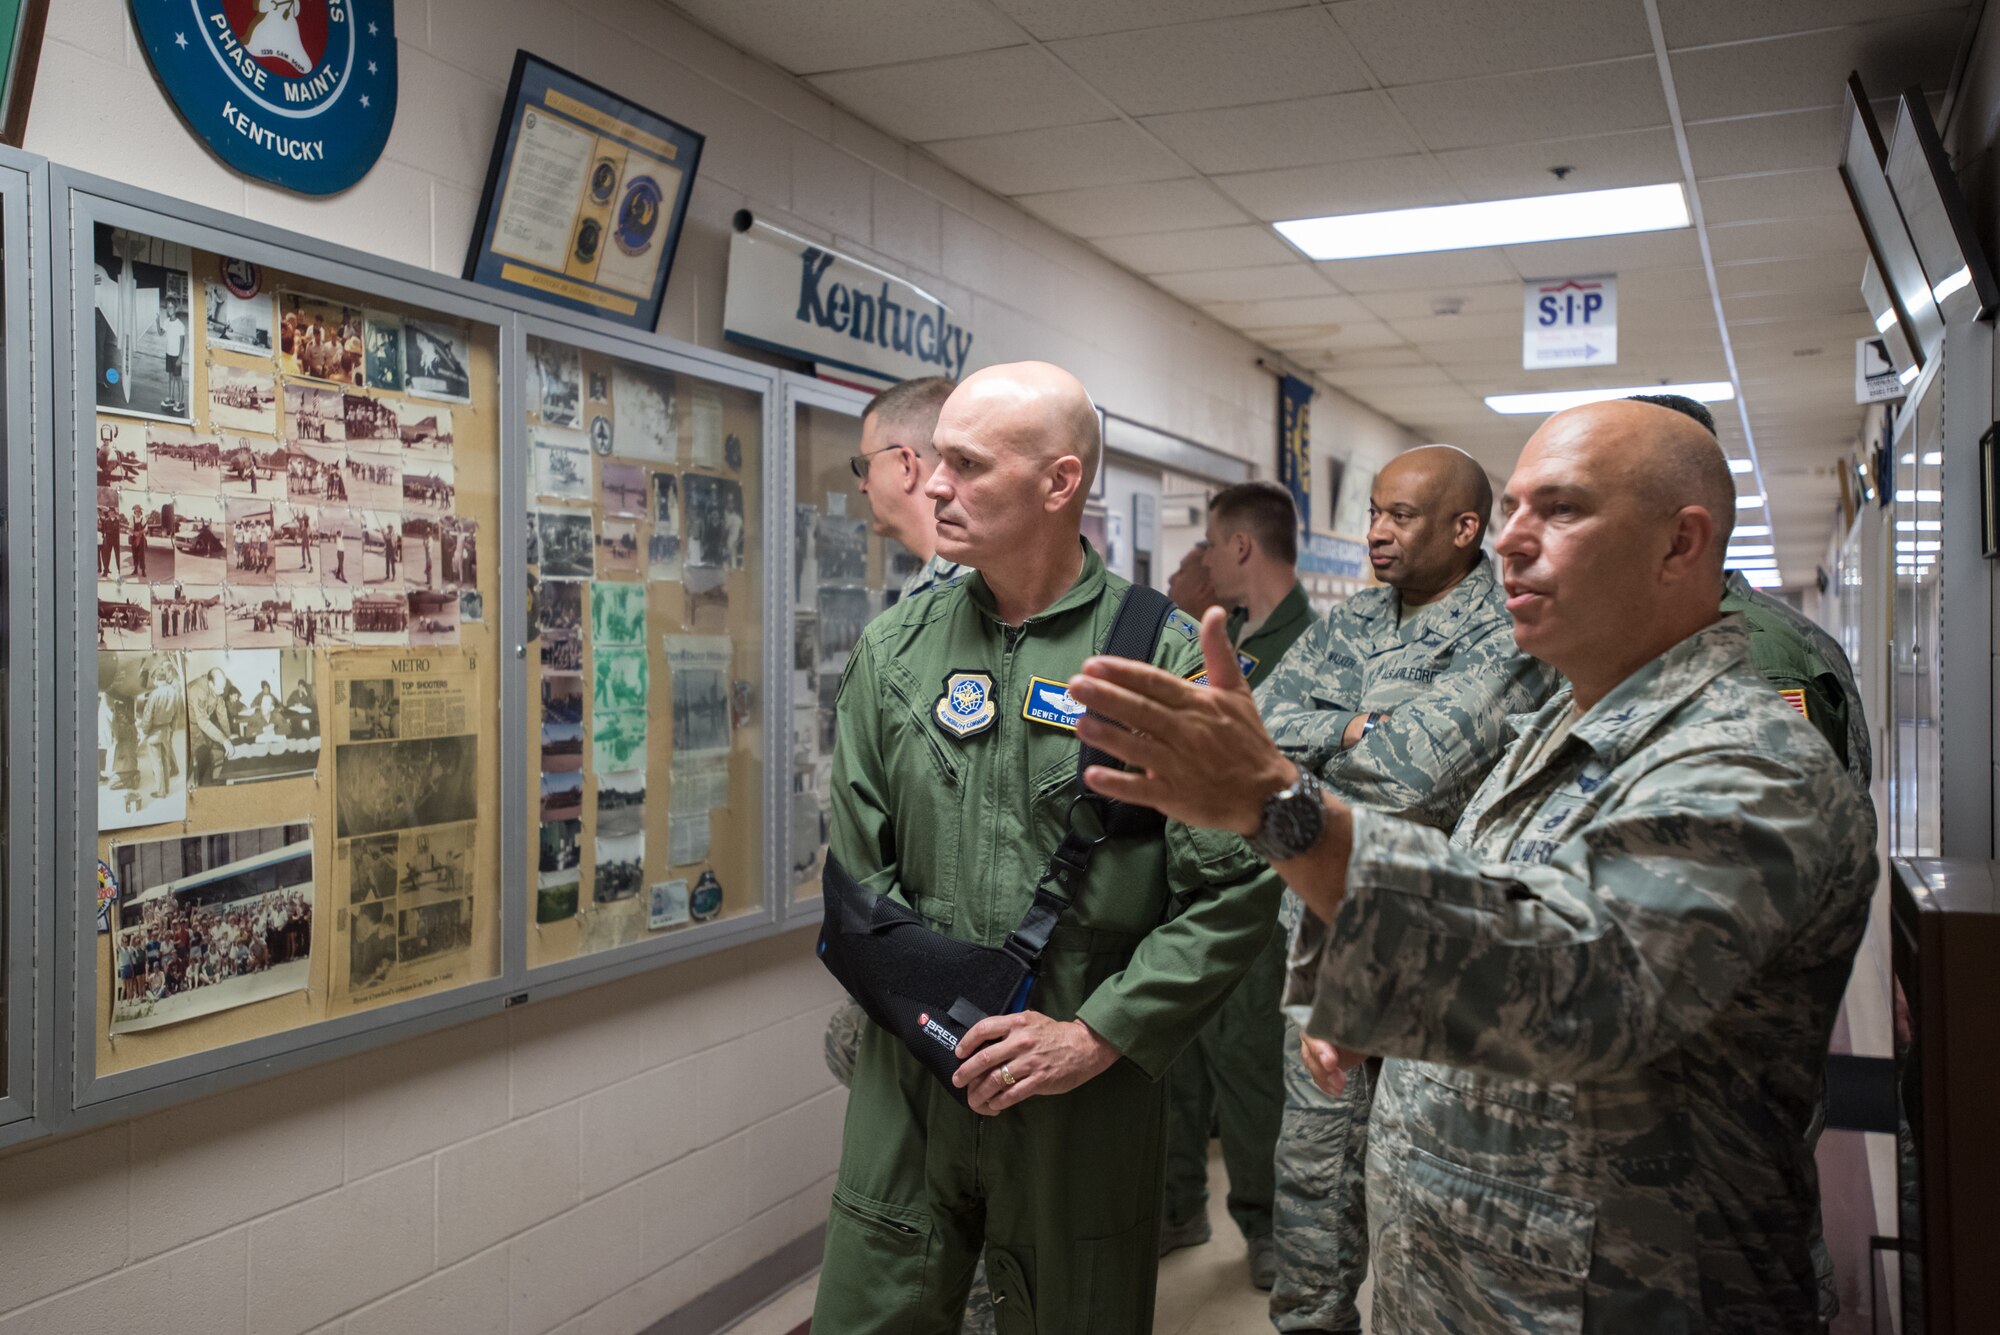 The commander of Air Mobility Command, Gen. Carlton D. Everhart II (left), views historical displays during a tour of the Kentucky Air National Guard Base in Louisville, Ky., Aug. 3, 2018. The wing is home to 1,200 Airmen and eight C-130H Hercules aircraft. (U.S. Air National Guard photo by Lt. Col. Dale Greer)